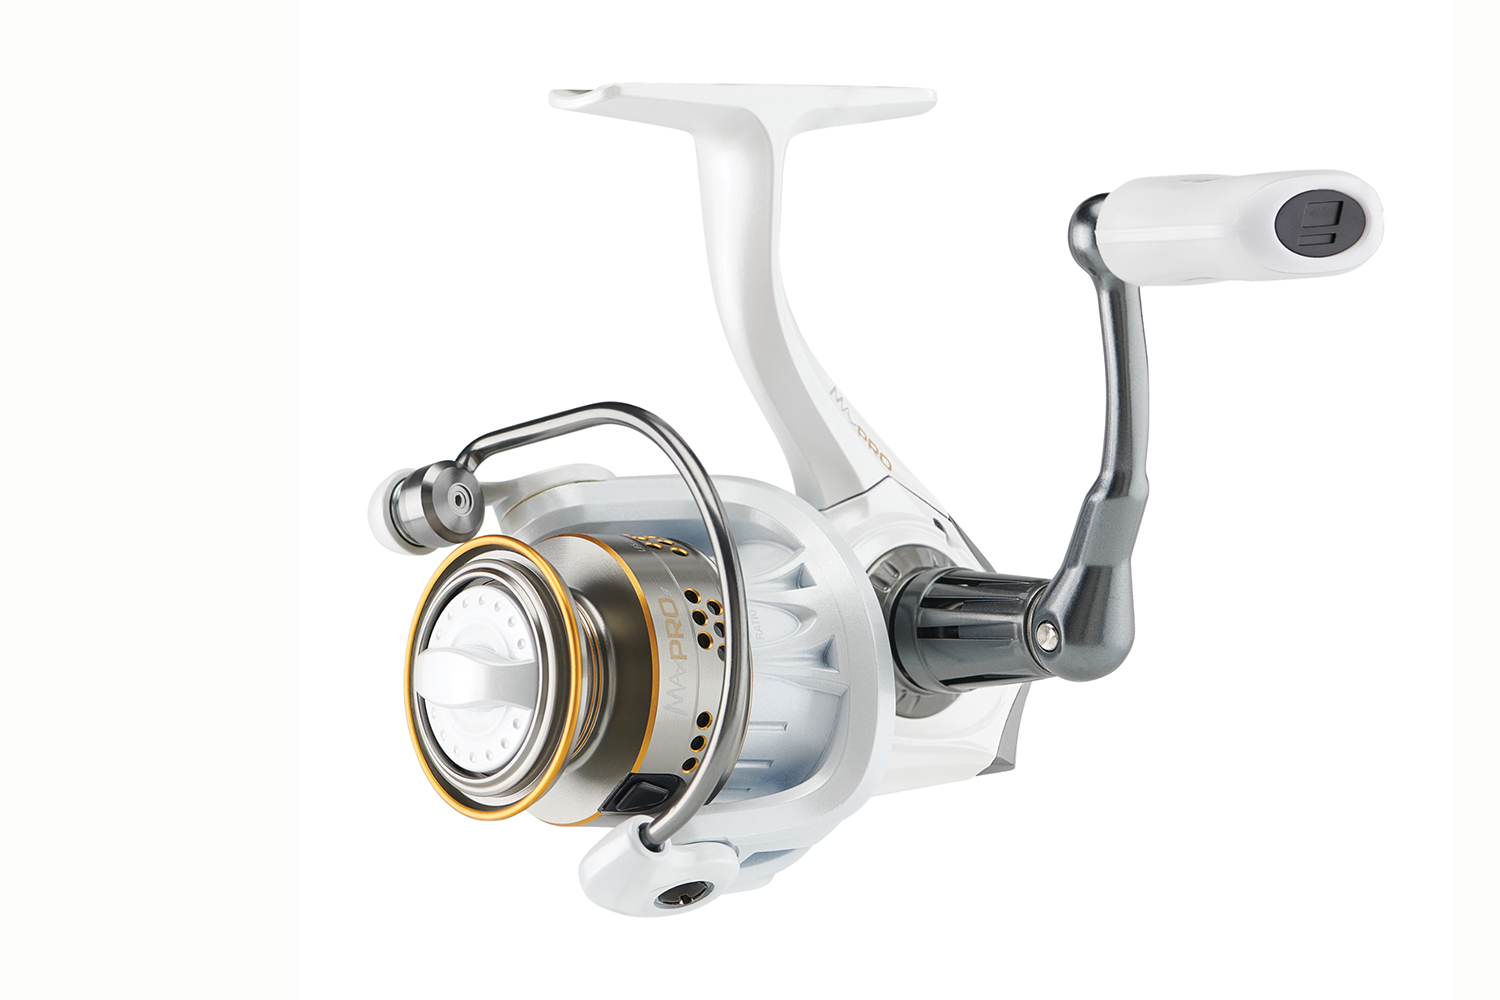 <p><b>Abu Garcia Max Pro Spinning Reel & Combo</b></p>
<p>Accessible for all anglers, the new Abu Garcia Max PRO spinning reels and combos will give any angler a leg up in the competition. Reels feature six ball bearings plus one roller bearing for smooth operation, the Rocket Line Management System for better control of all types of fishing line, and the Rocket Spool Lip Design that offers more control of the line coming off the spool. Machined aluminum spools provide strength without the added weight and their slow oscillation helps ensure even line lay with all types of fishing line. Max Pro spinning combos are constructed from 24-ton graphite for a lightweight, balanced design and feature custom designed reel seats with an integrated polymer comfort grip. Available July 2020. </p>
<p><a href=